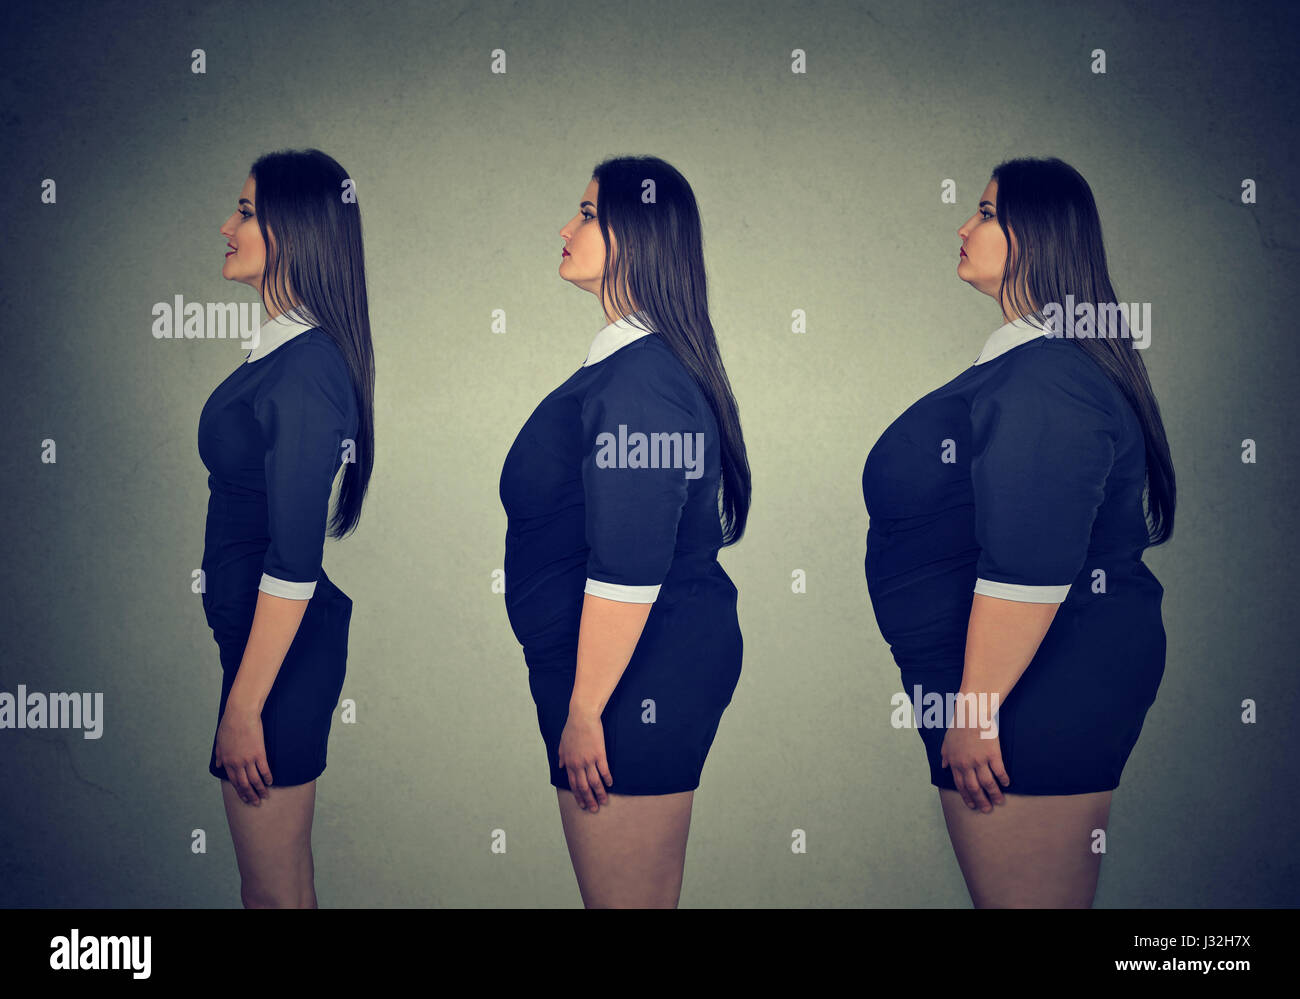 Transformation. Young fat woman becoming slim fit girl. Diet choice right nutrition healthy lifestyle concept Stock Photo